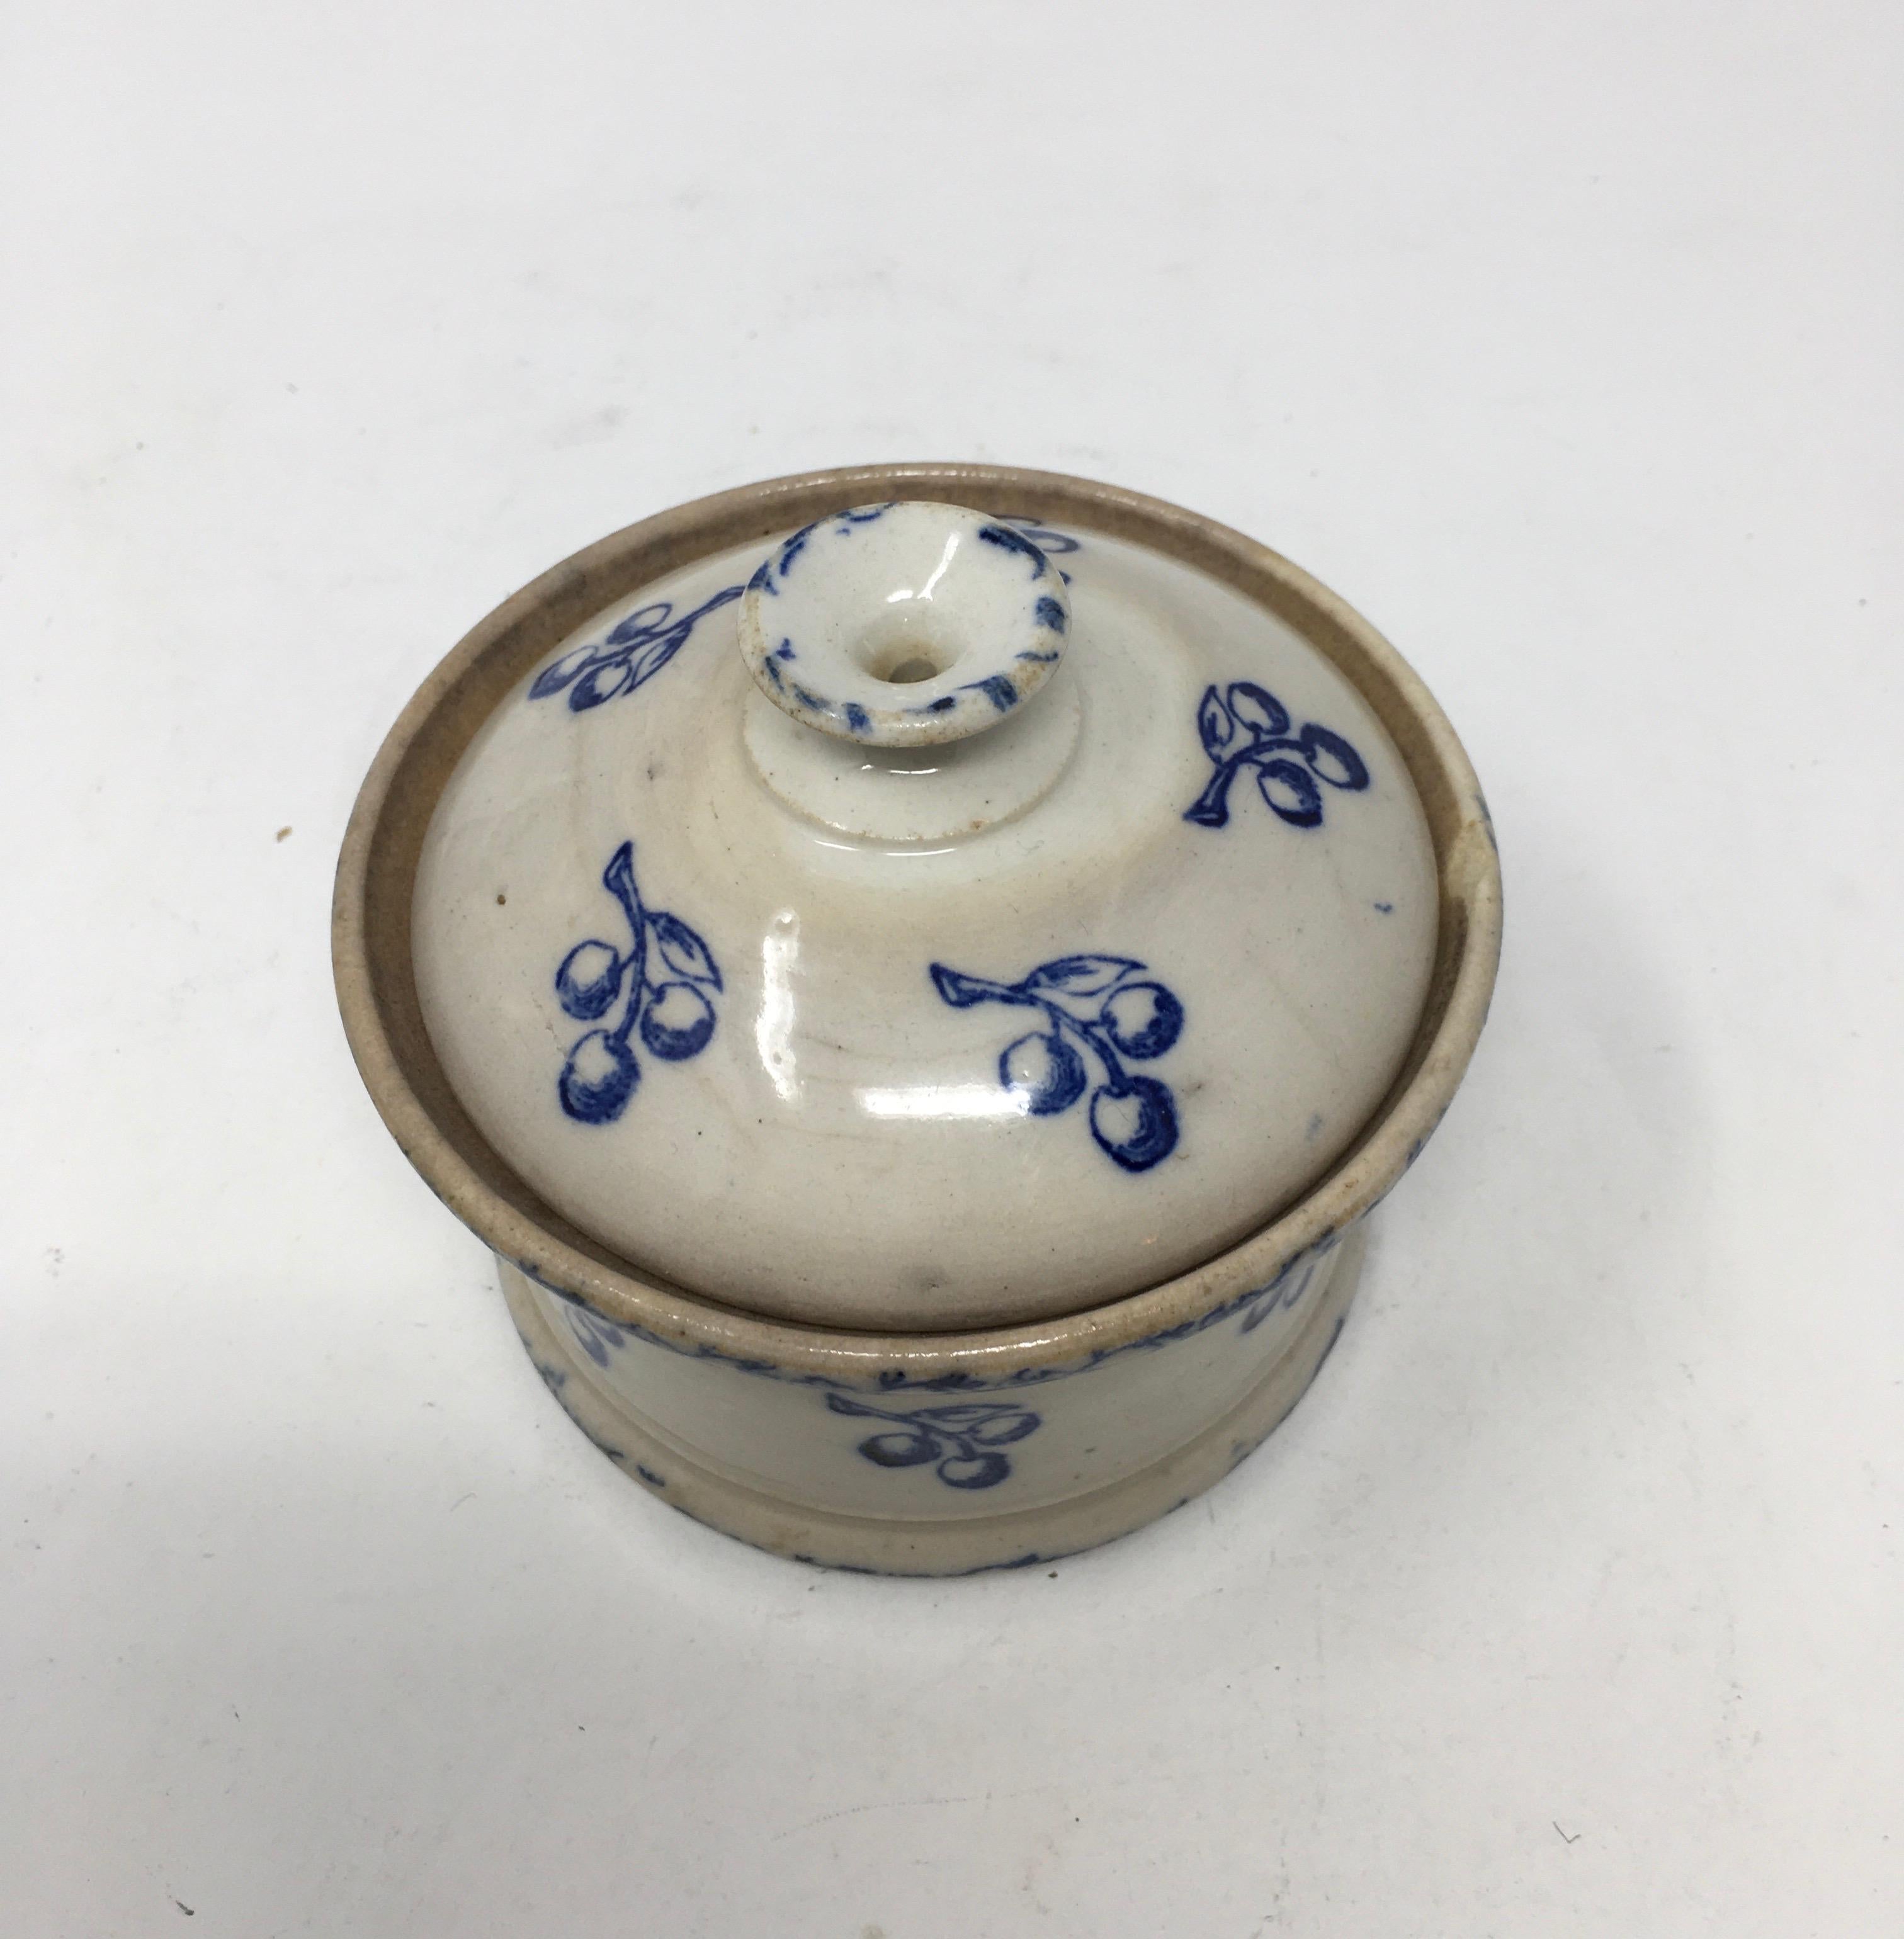 Found in France, this antique Ironstone Terre de Fonte lidded cache pot has lovely blue floral transferred design. The piece is complete with a knobbed pull handle on the lid and two handles on the cache pot itself. Signed Terre de Font St. Vallier